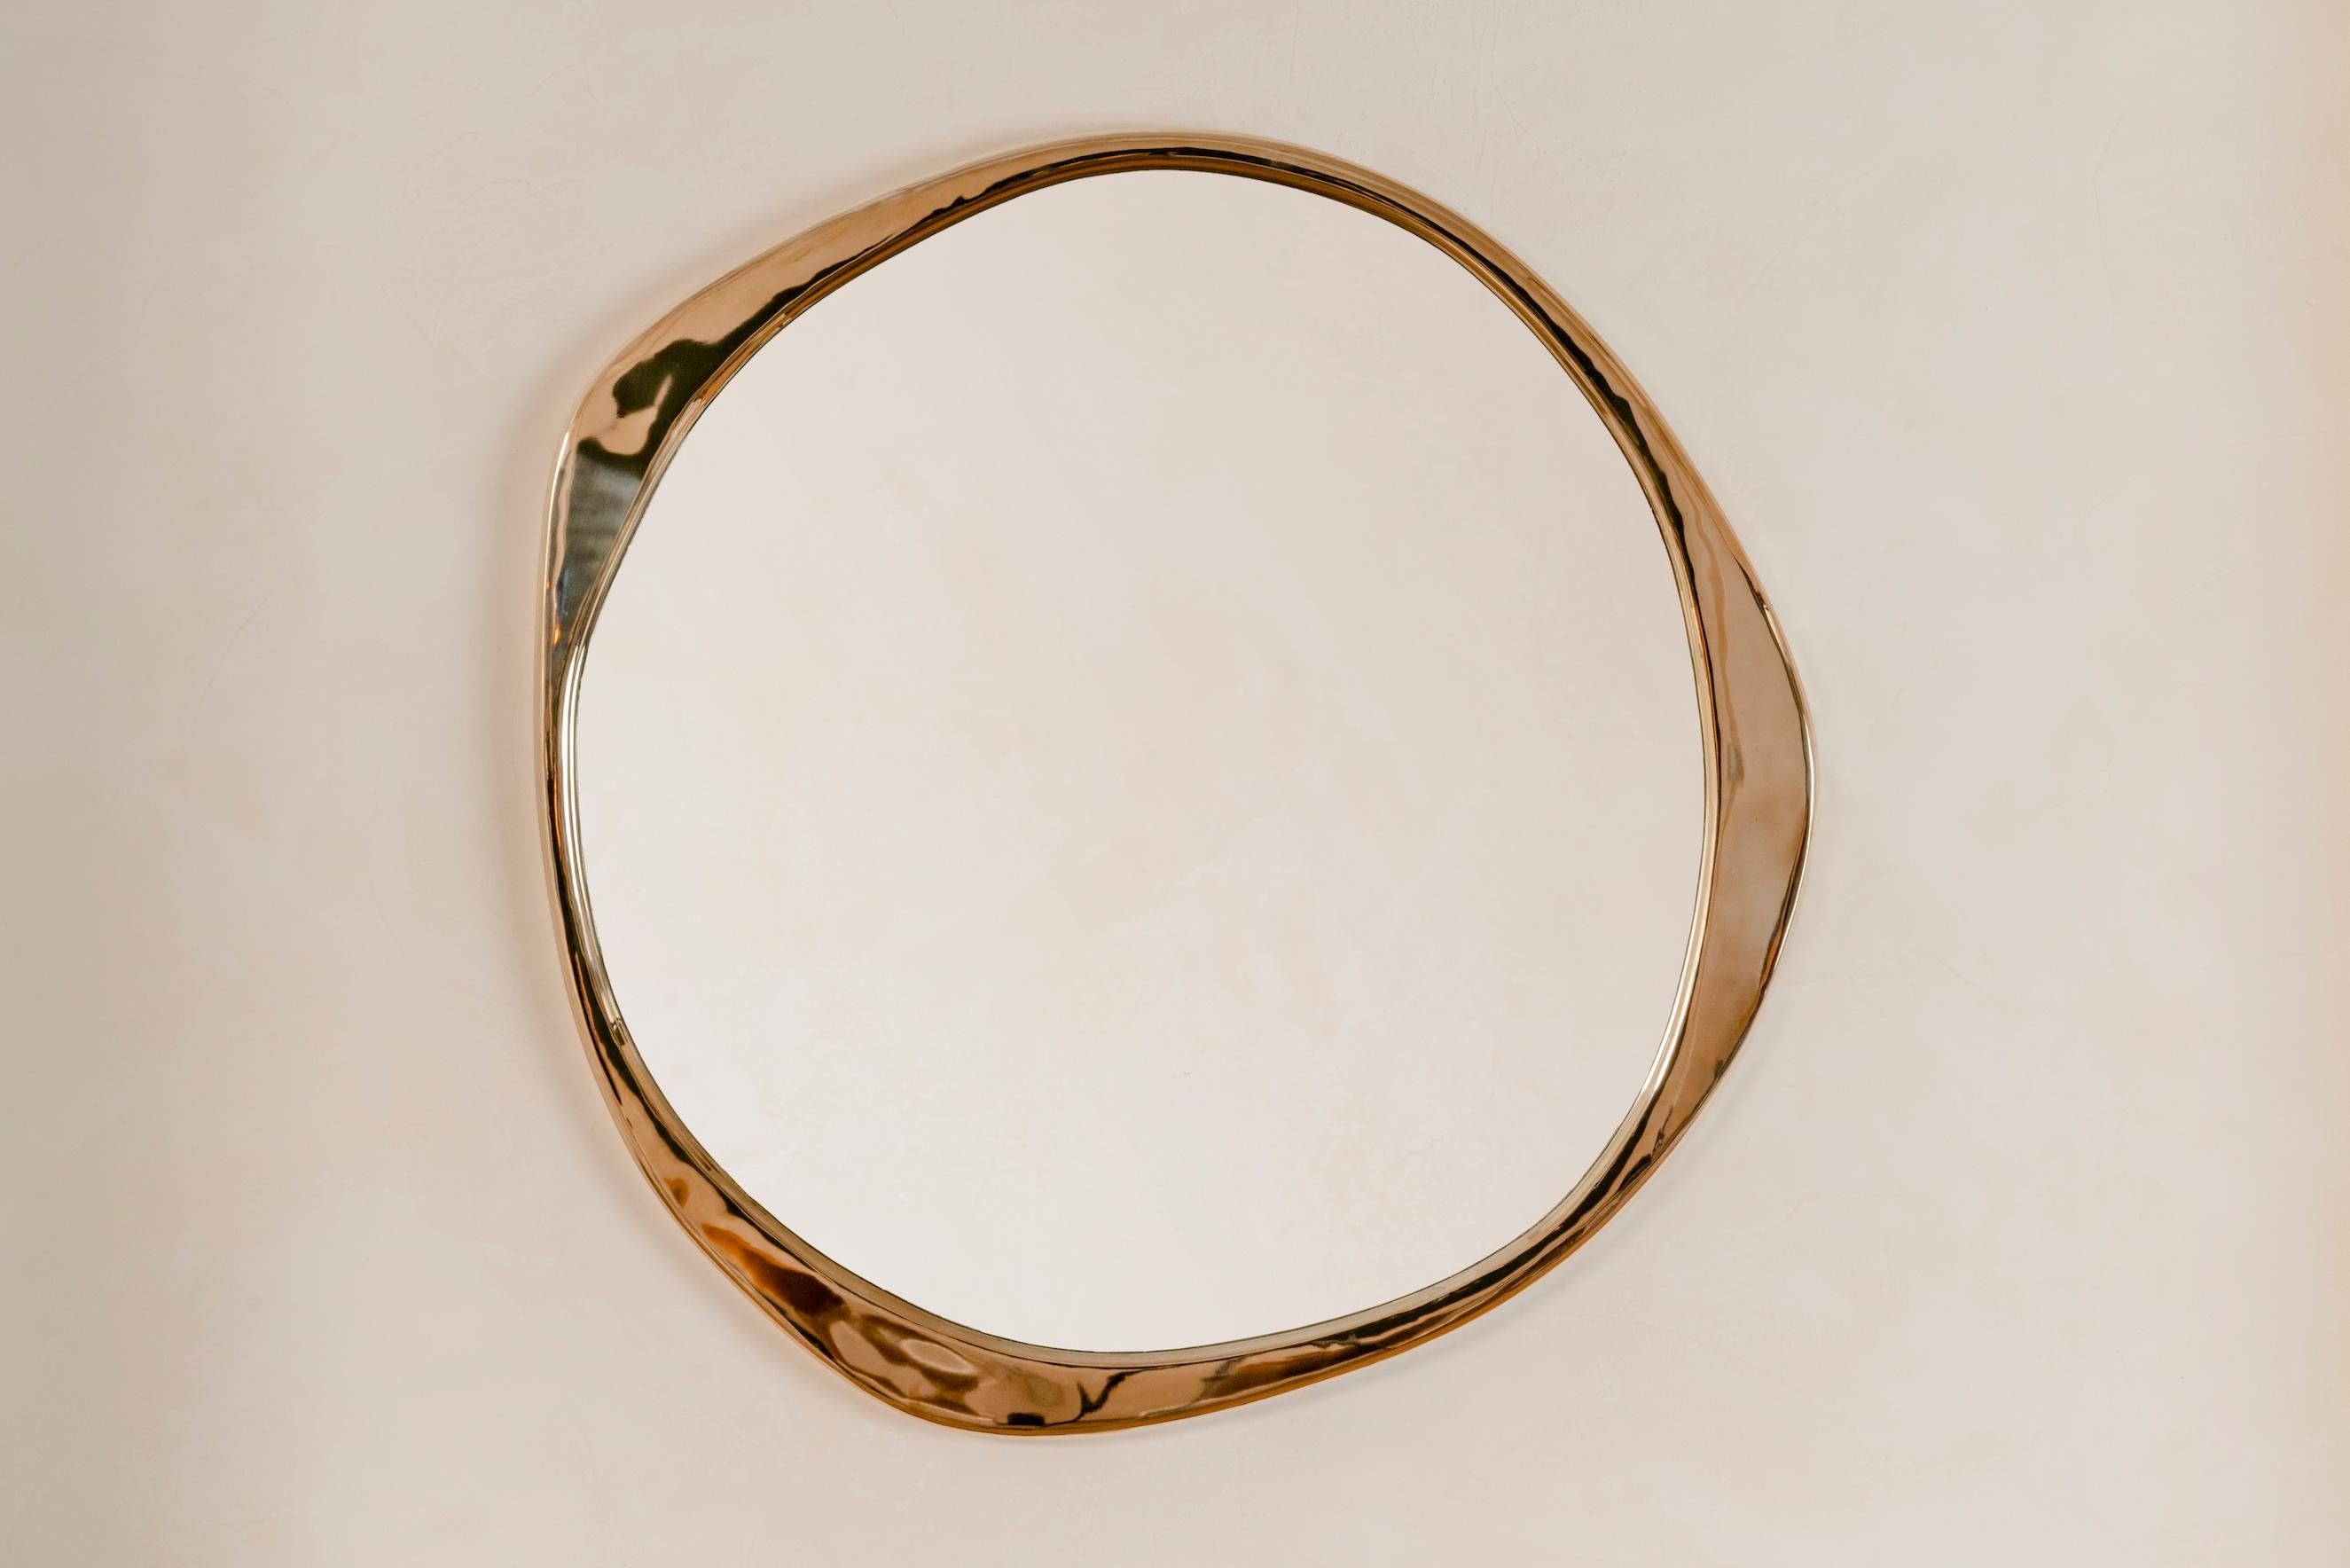 The sculptural A.Cepa Mirror in Polished Bronze is cast in bronze at a fine art foundry in Pennsylvania, and skillfully polished by hand. Undulating and irregular in form, the A. Cepa mirror is the focal point in any room with its captivating